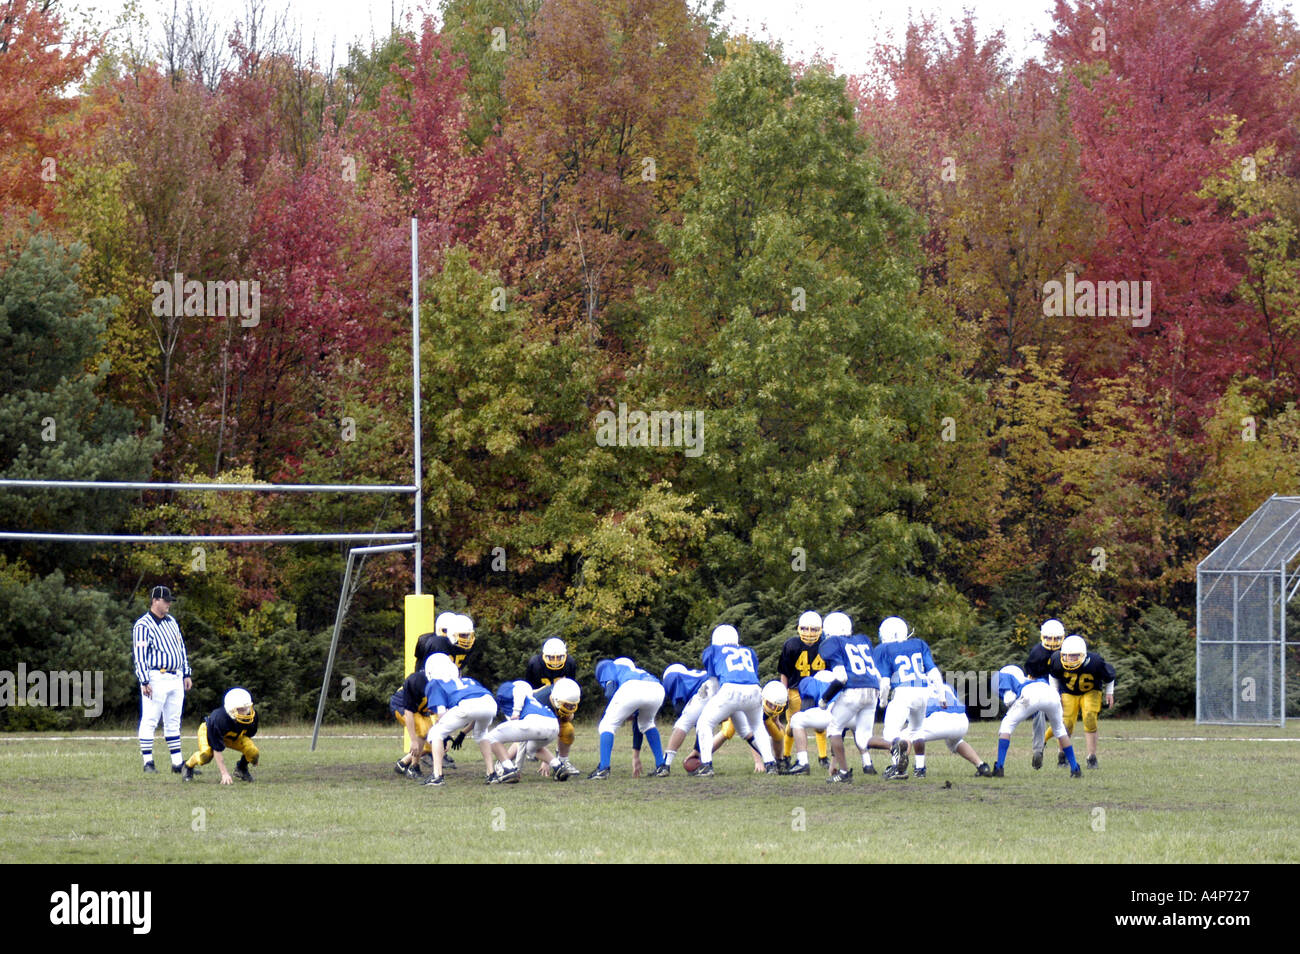 Middle School football action ages 12 to 14 male players Stock Photo